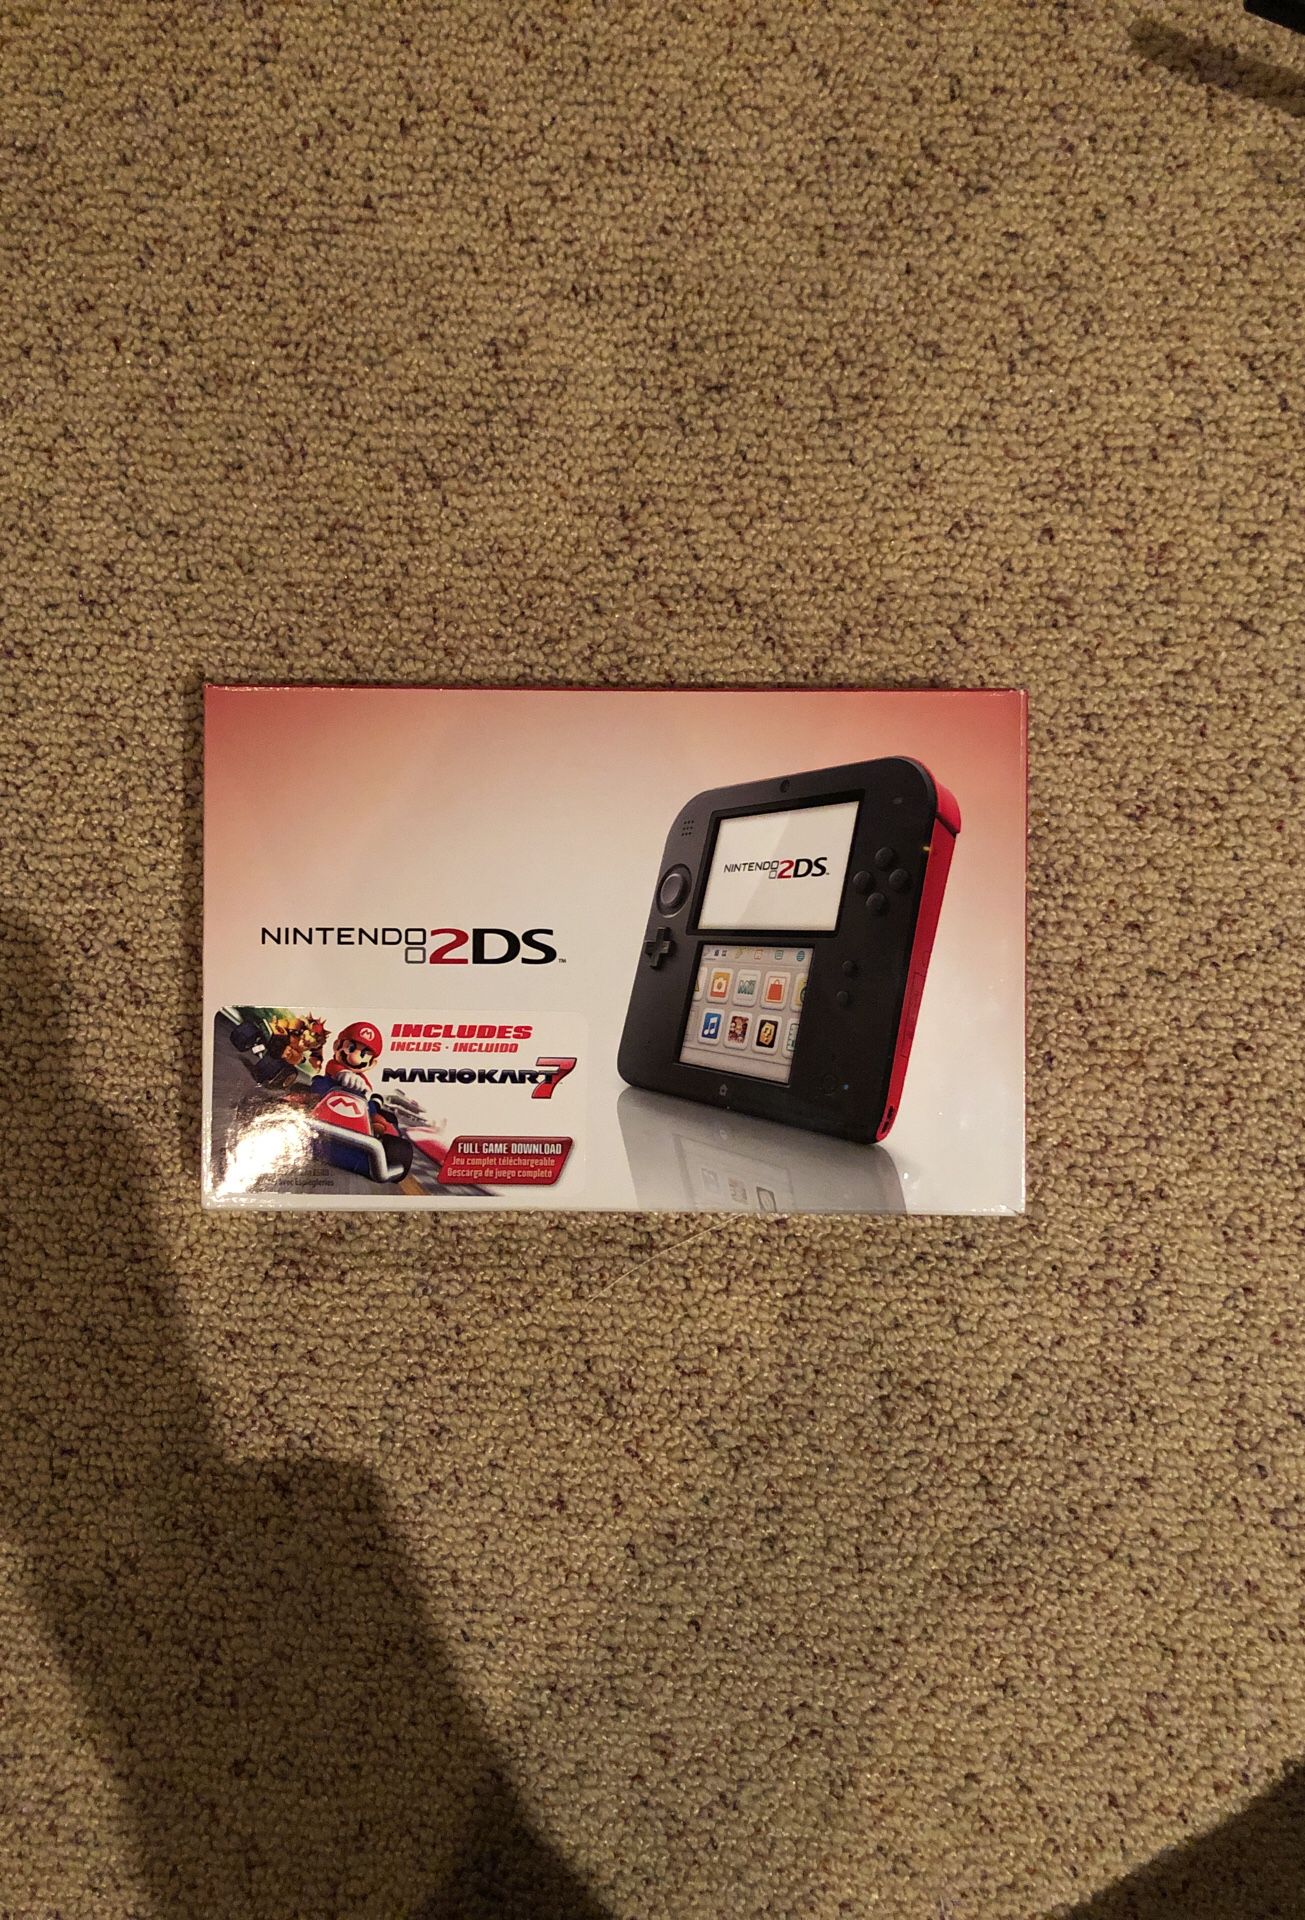 Nintendo 2DS (Red) Loaded with MarioKart 7 and 4 Other Games